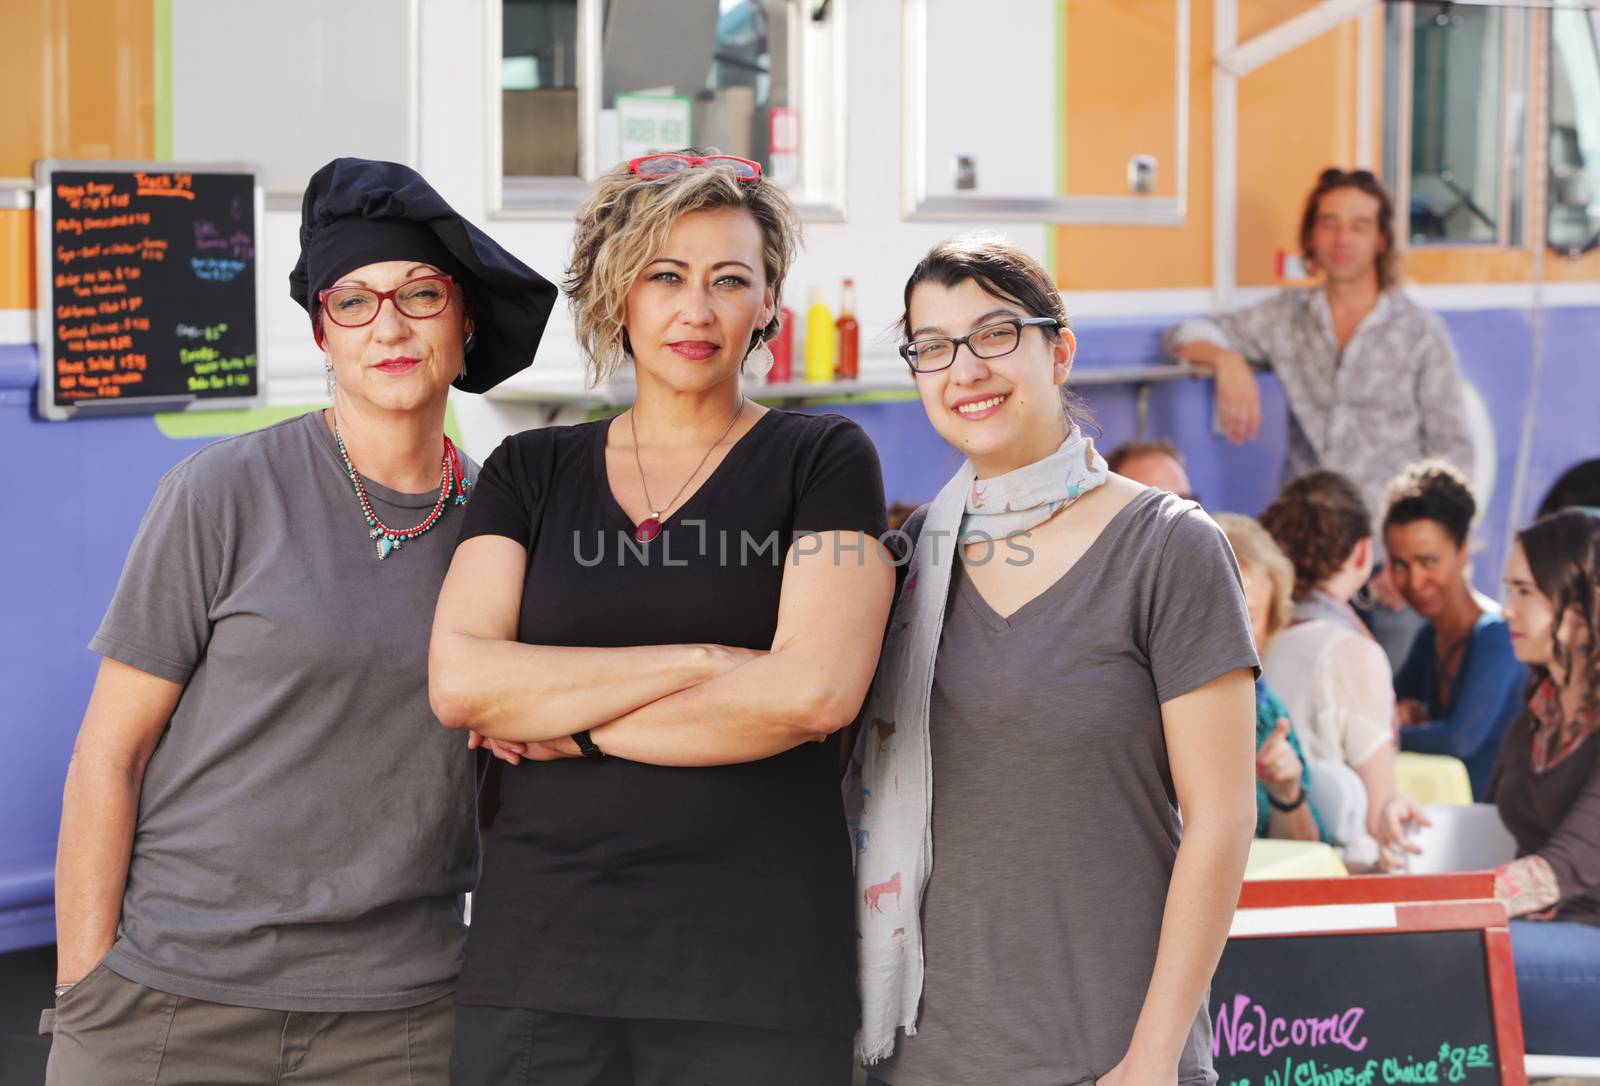 Three food workers posing in front of an outdoor food truck